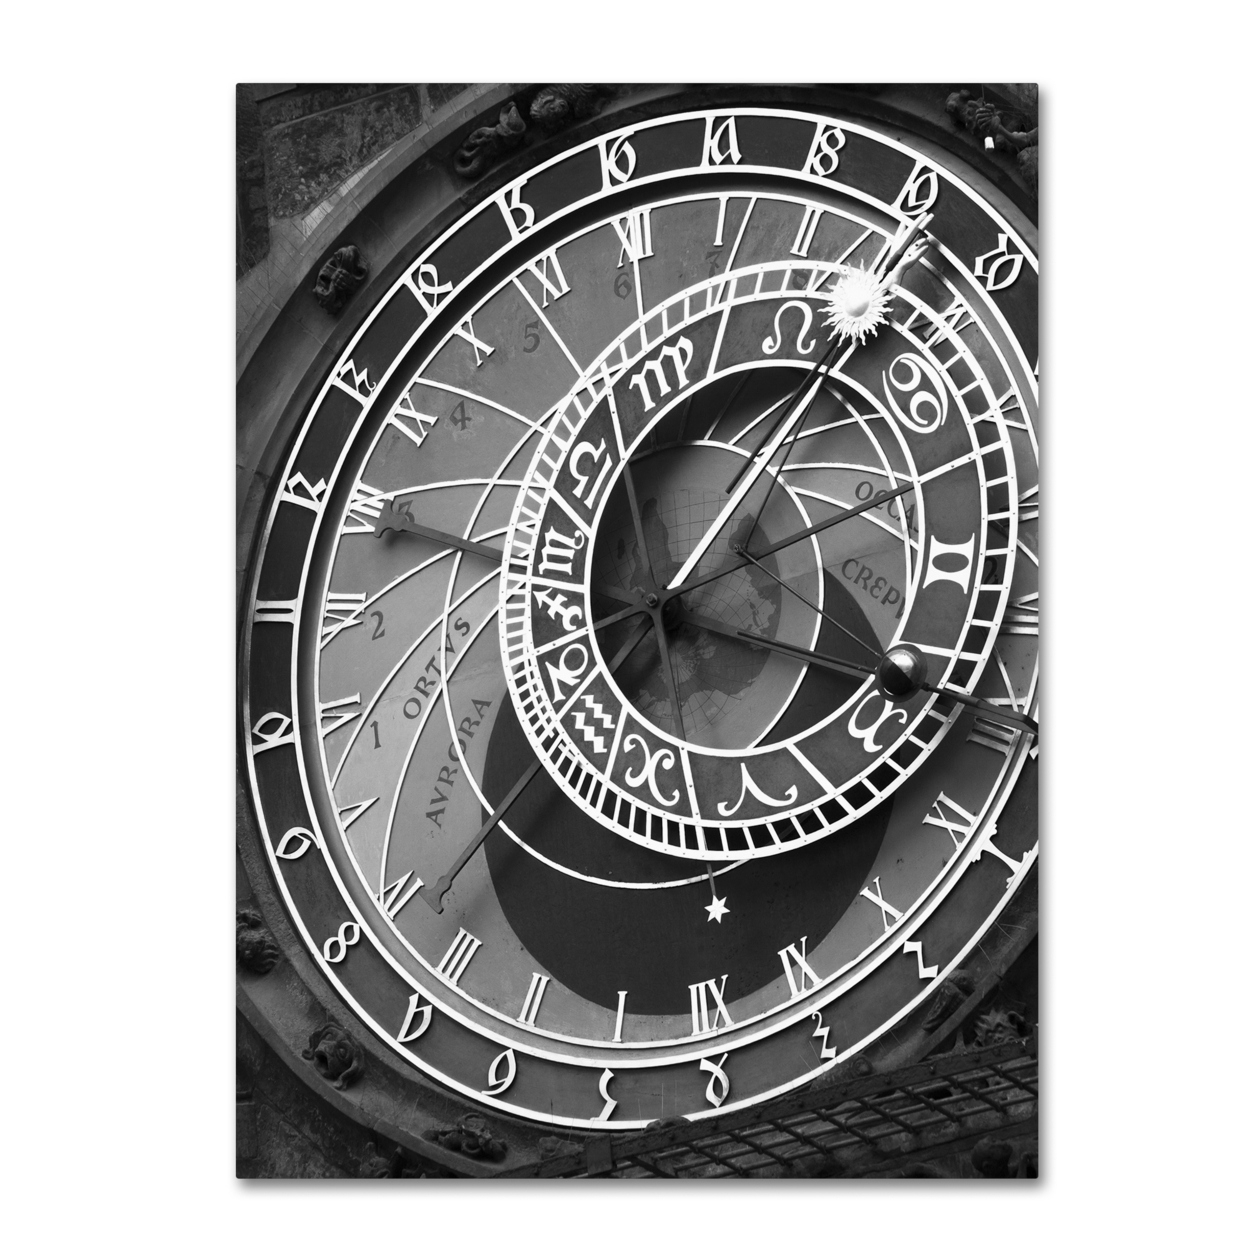 Moises Levy 'Astronomic Watch Prague 11' Canvas Wall Art 35 X 47 Inches